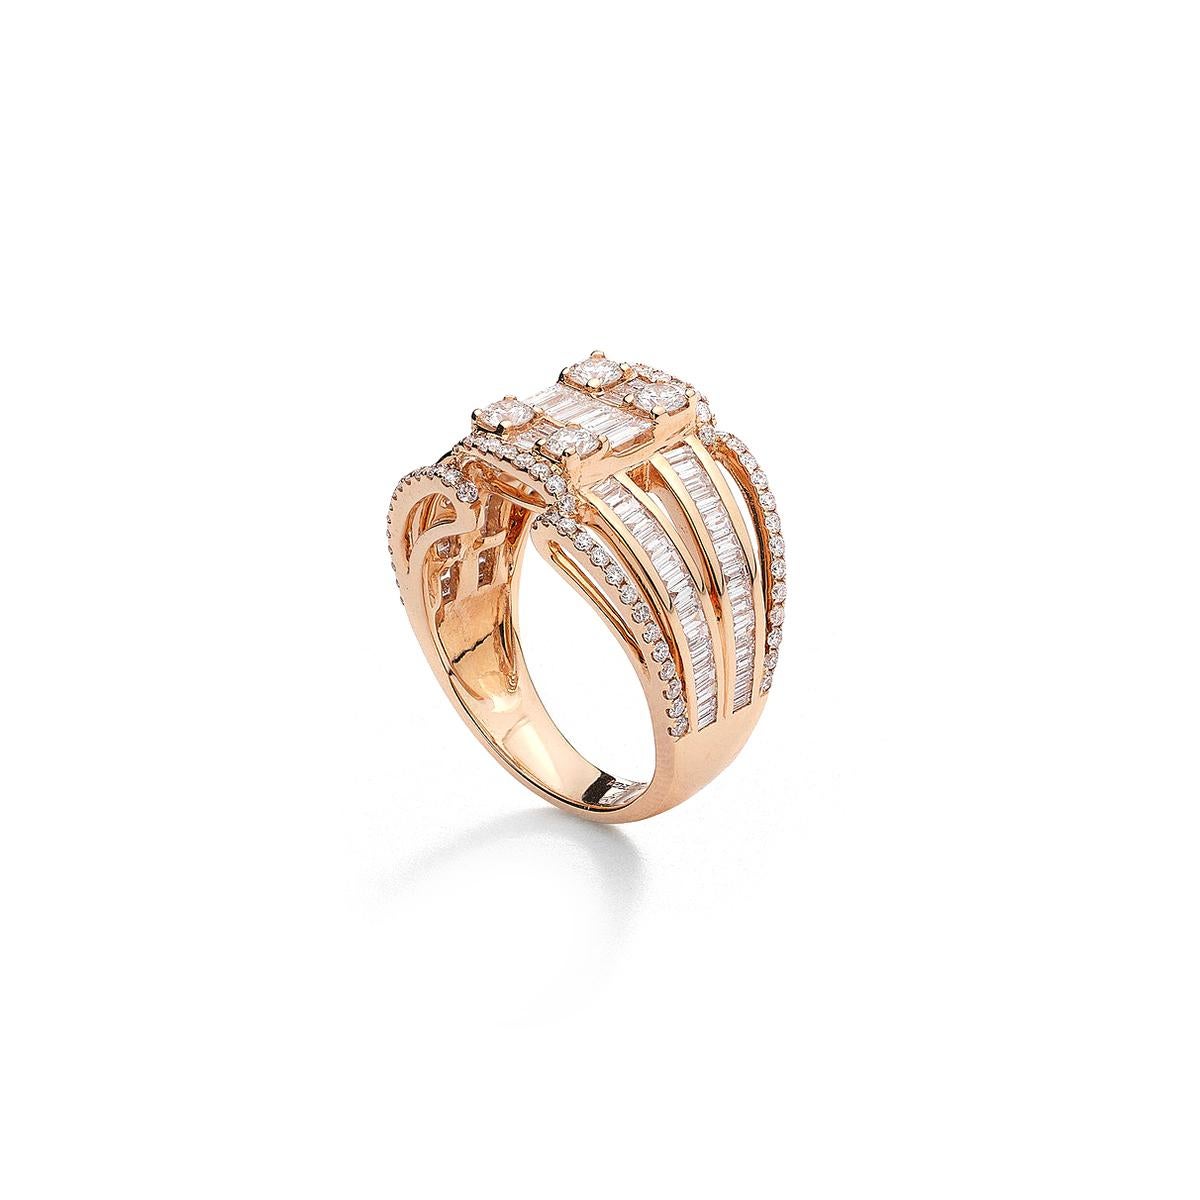 Ring in 18kt pink gold set with 79 baguette cut diamonds 1.12 cts and 78 diamonds 0.87 cts Size 54    

Total weight: 9.02 grams